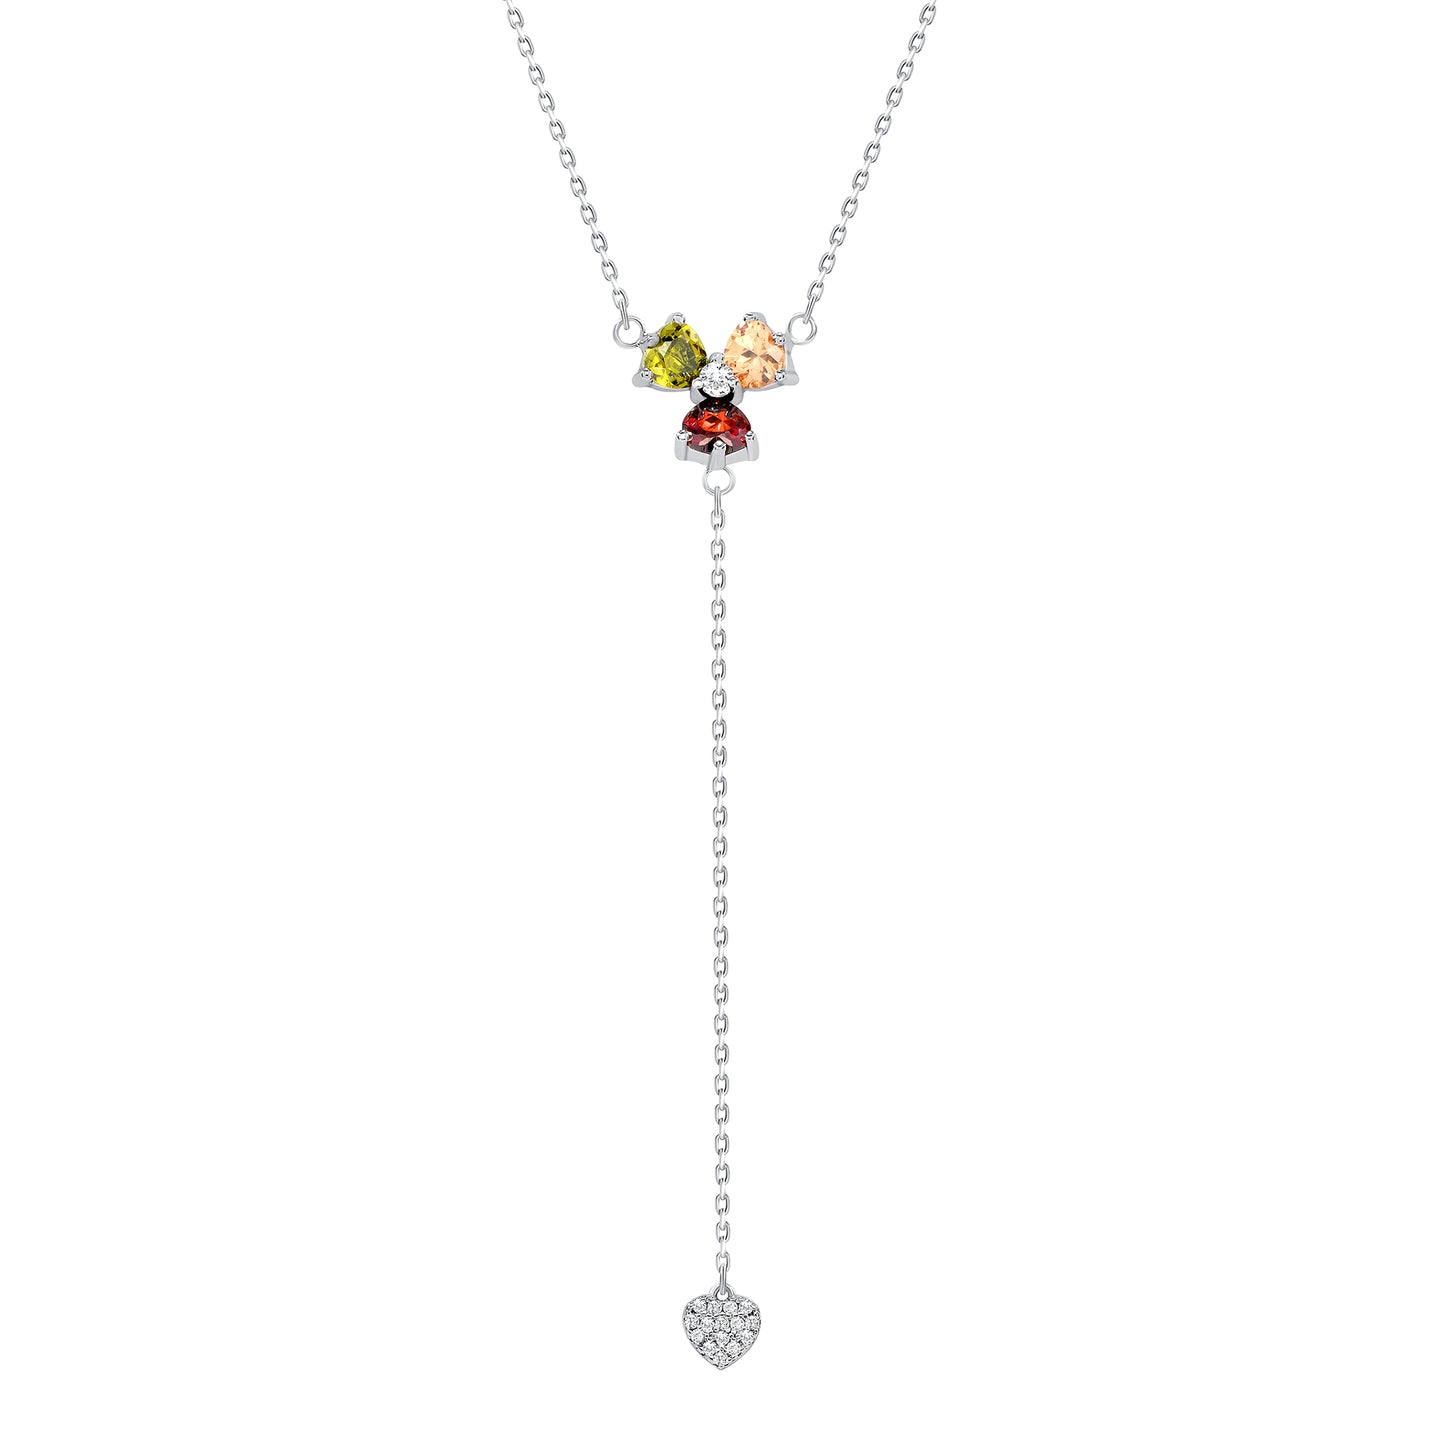 Silver 925 Rhodium Plated Flower w/ Cubic Zirconia Heart Necklace. BN3421MUL